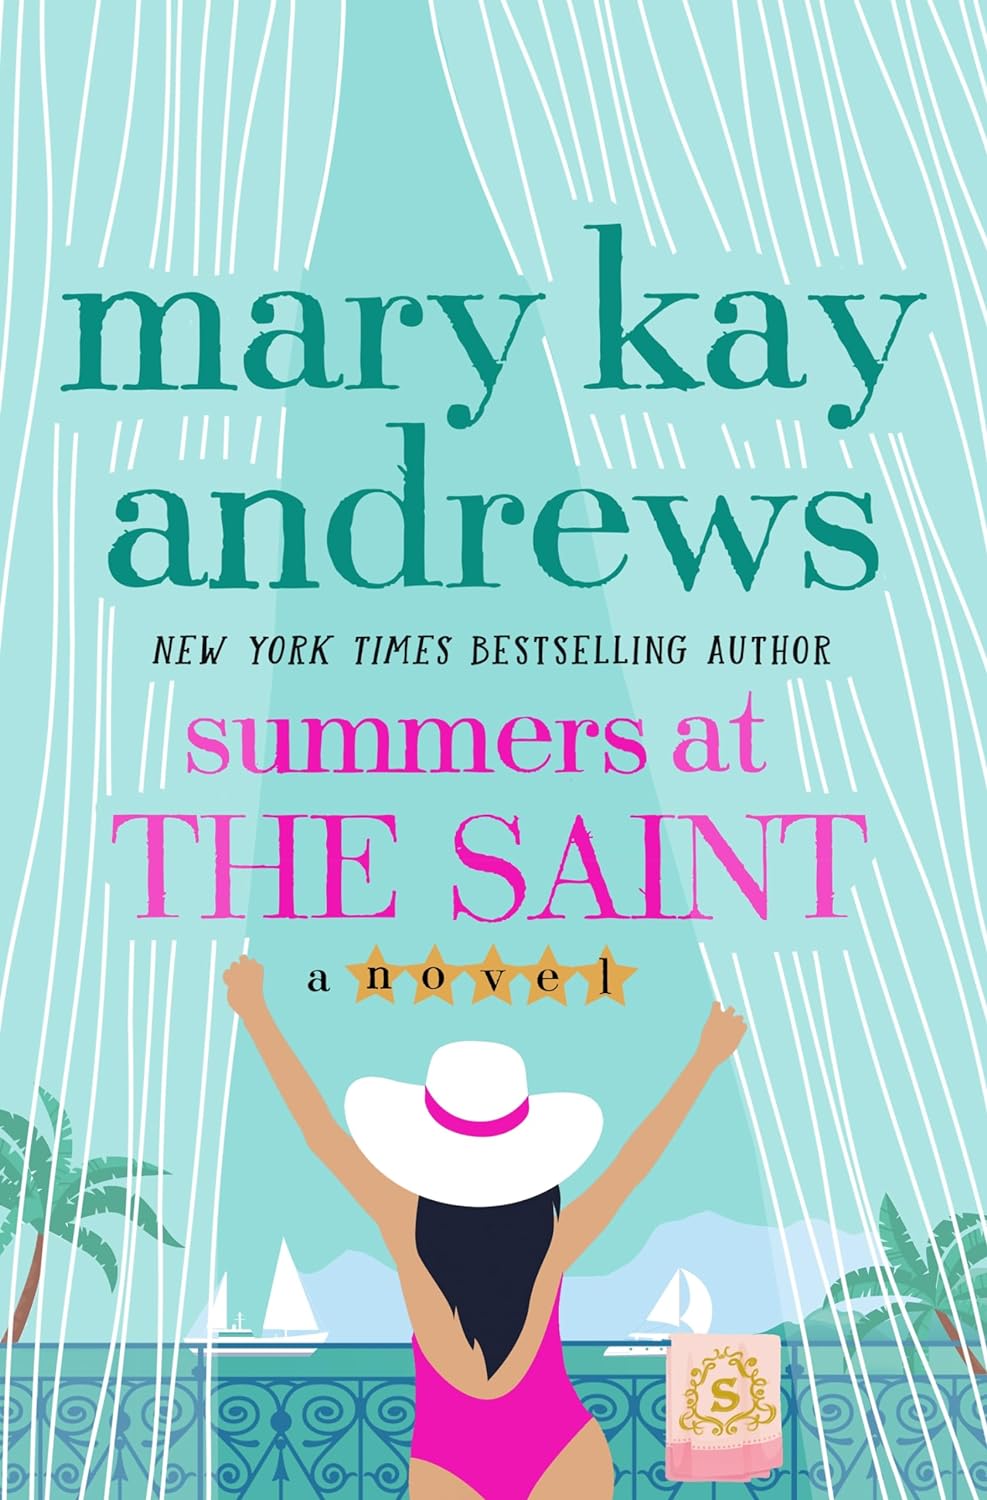 Image for "Summers at the Saint"